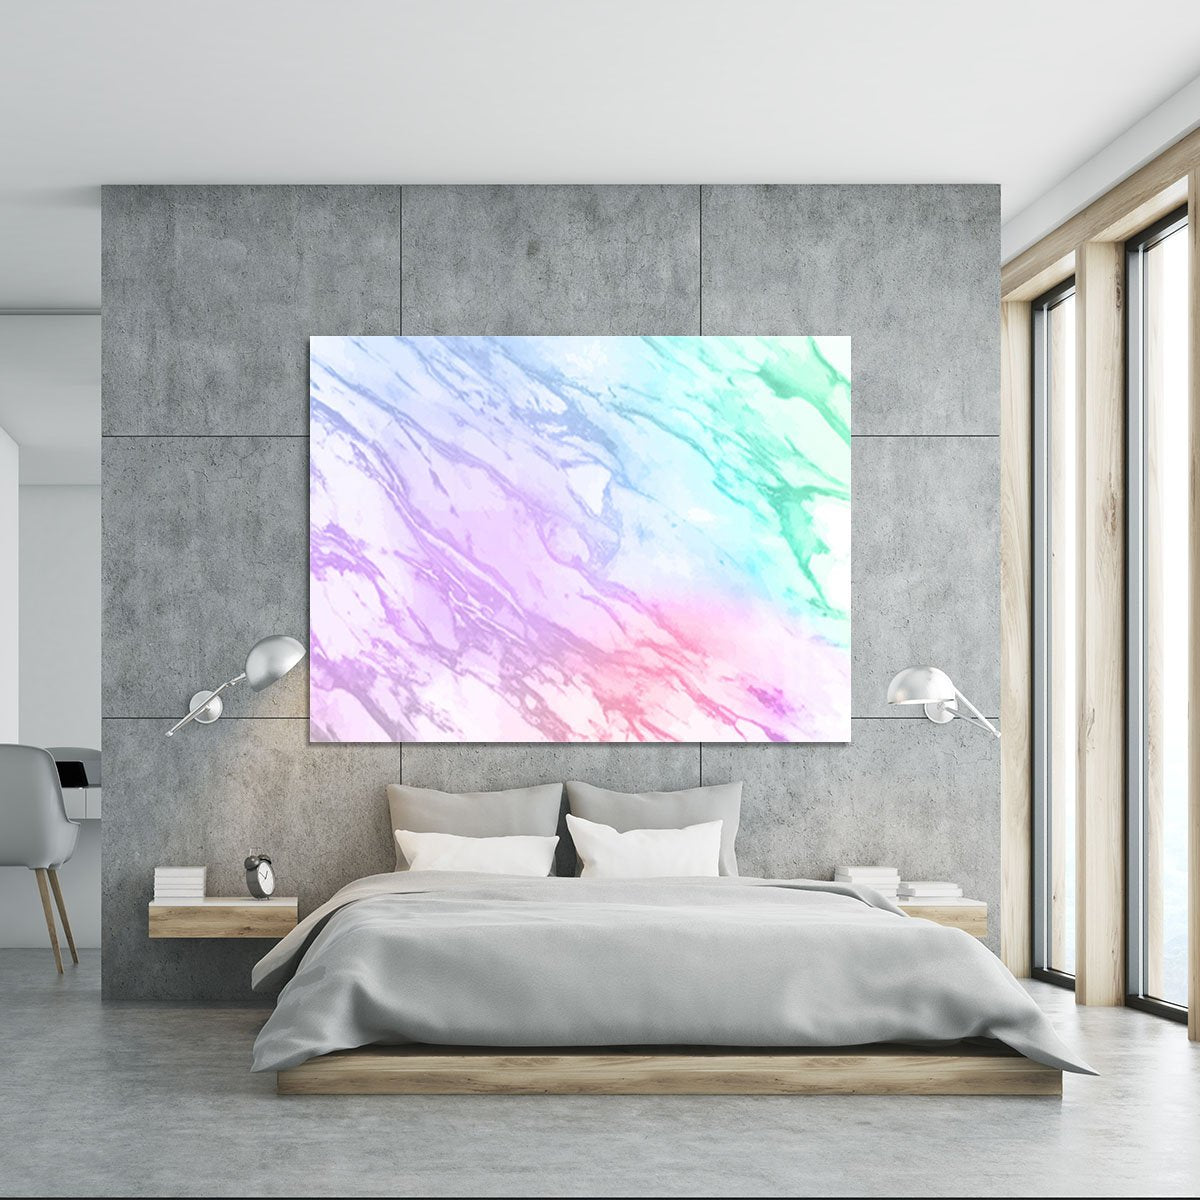 Neon Striped Marble Canvas Print or Poster